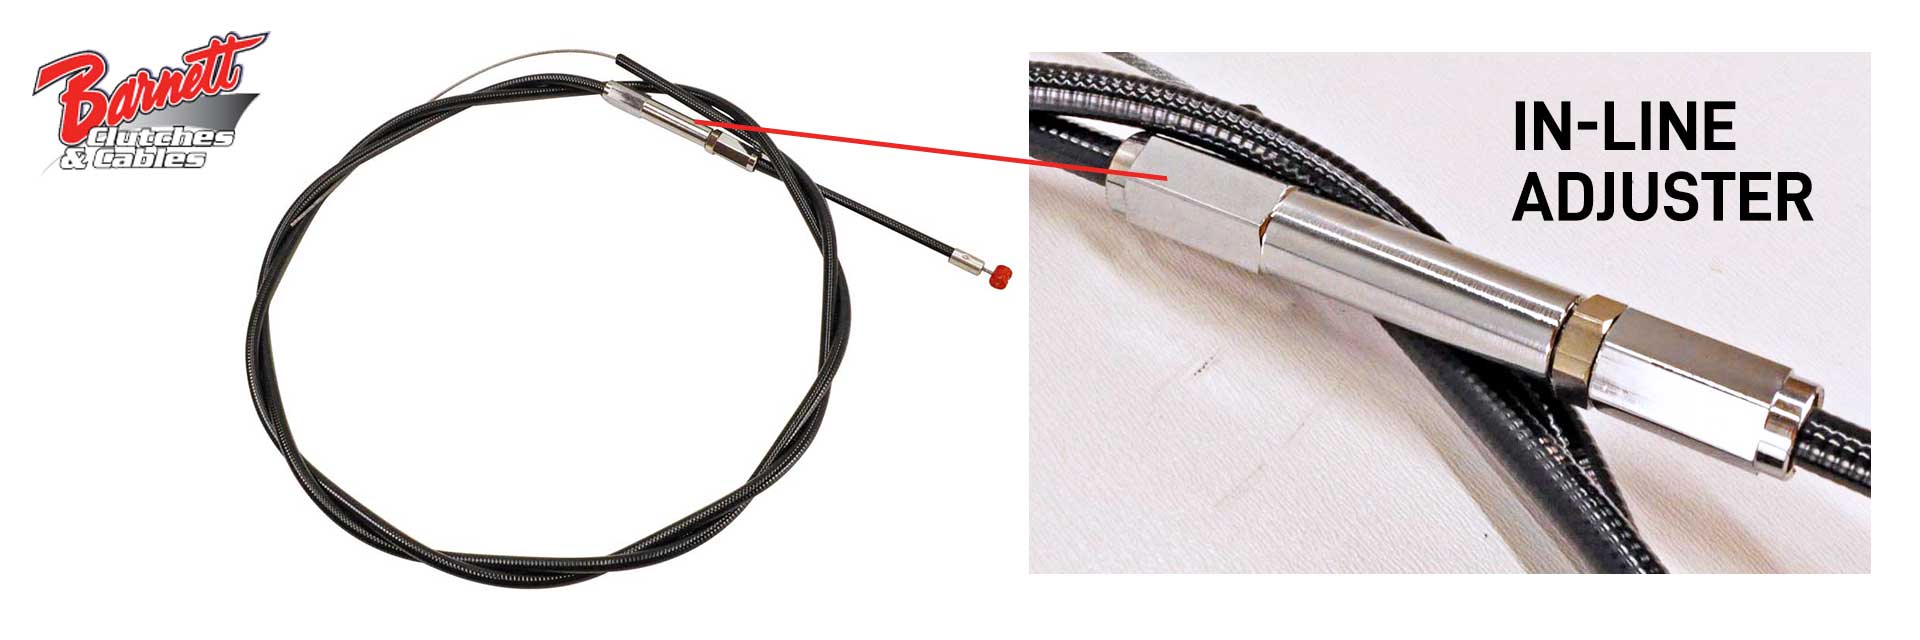 Barnett Clutch Cable and In-Line Adjuster